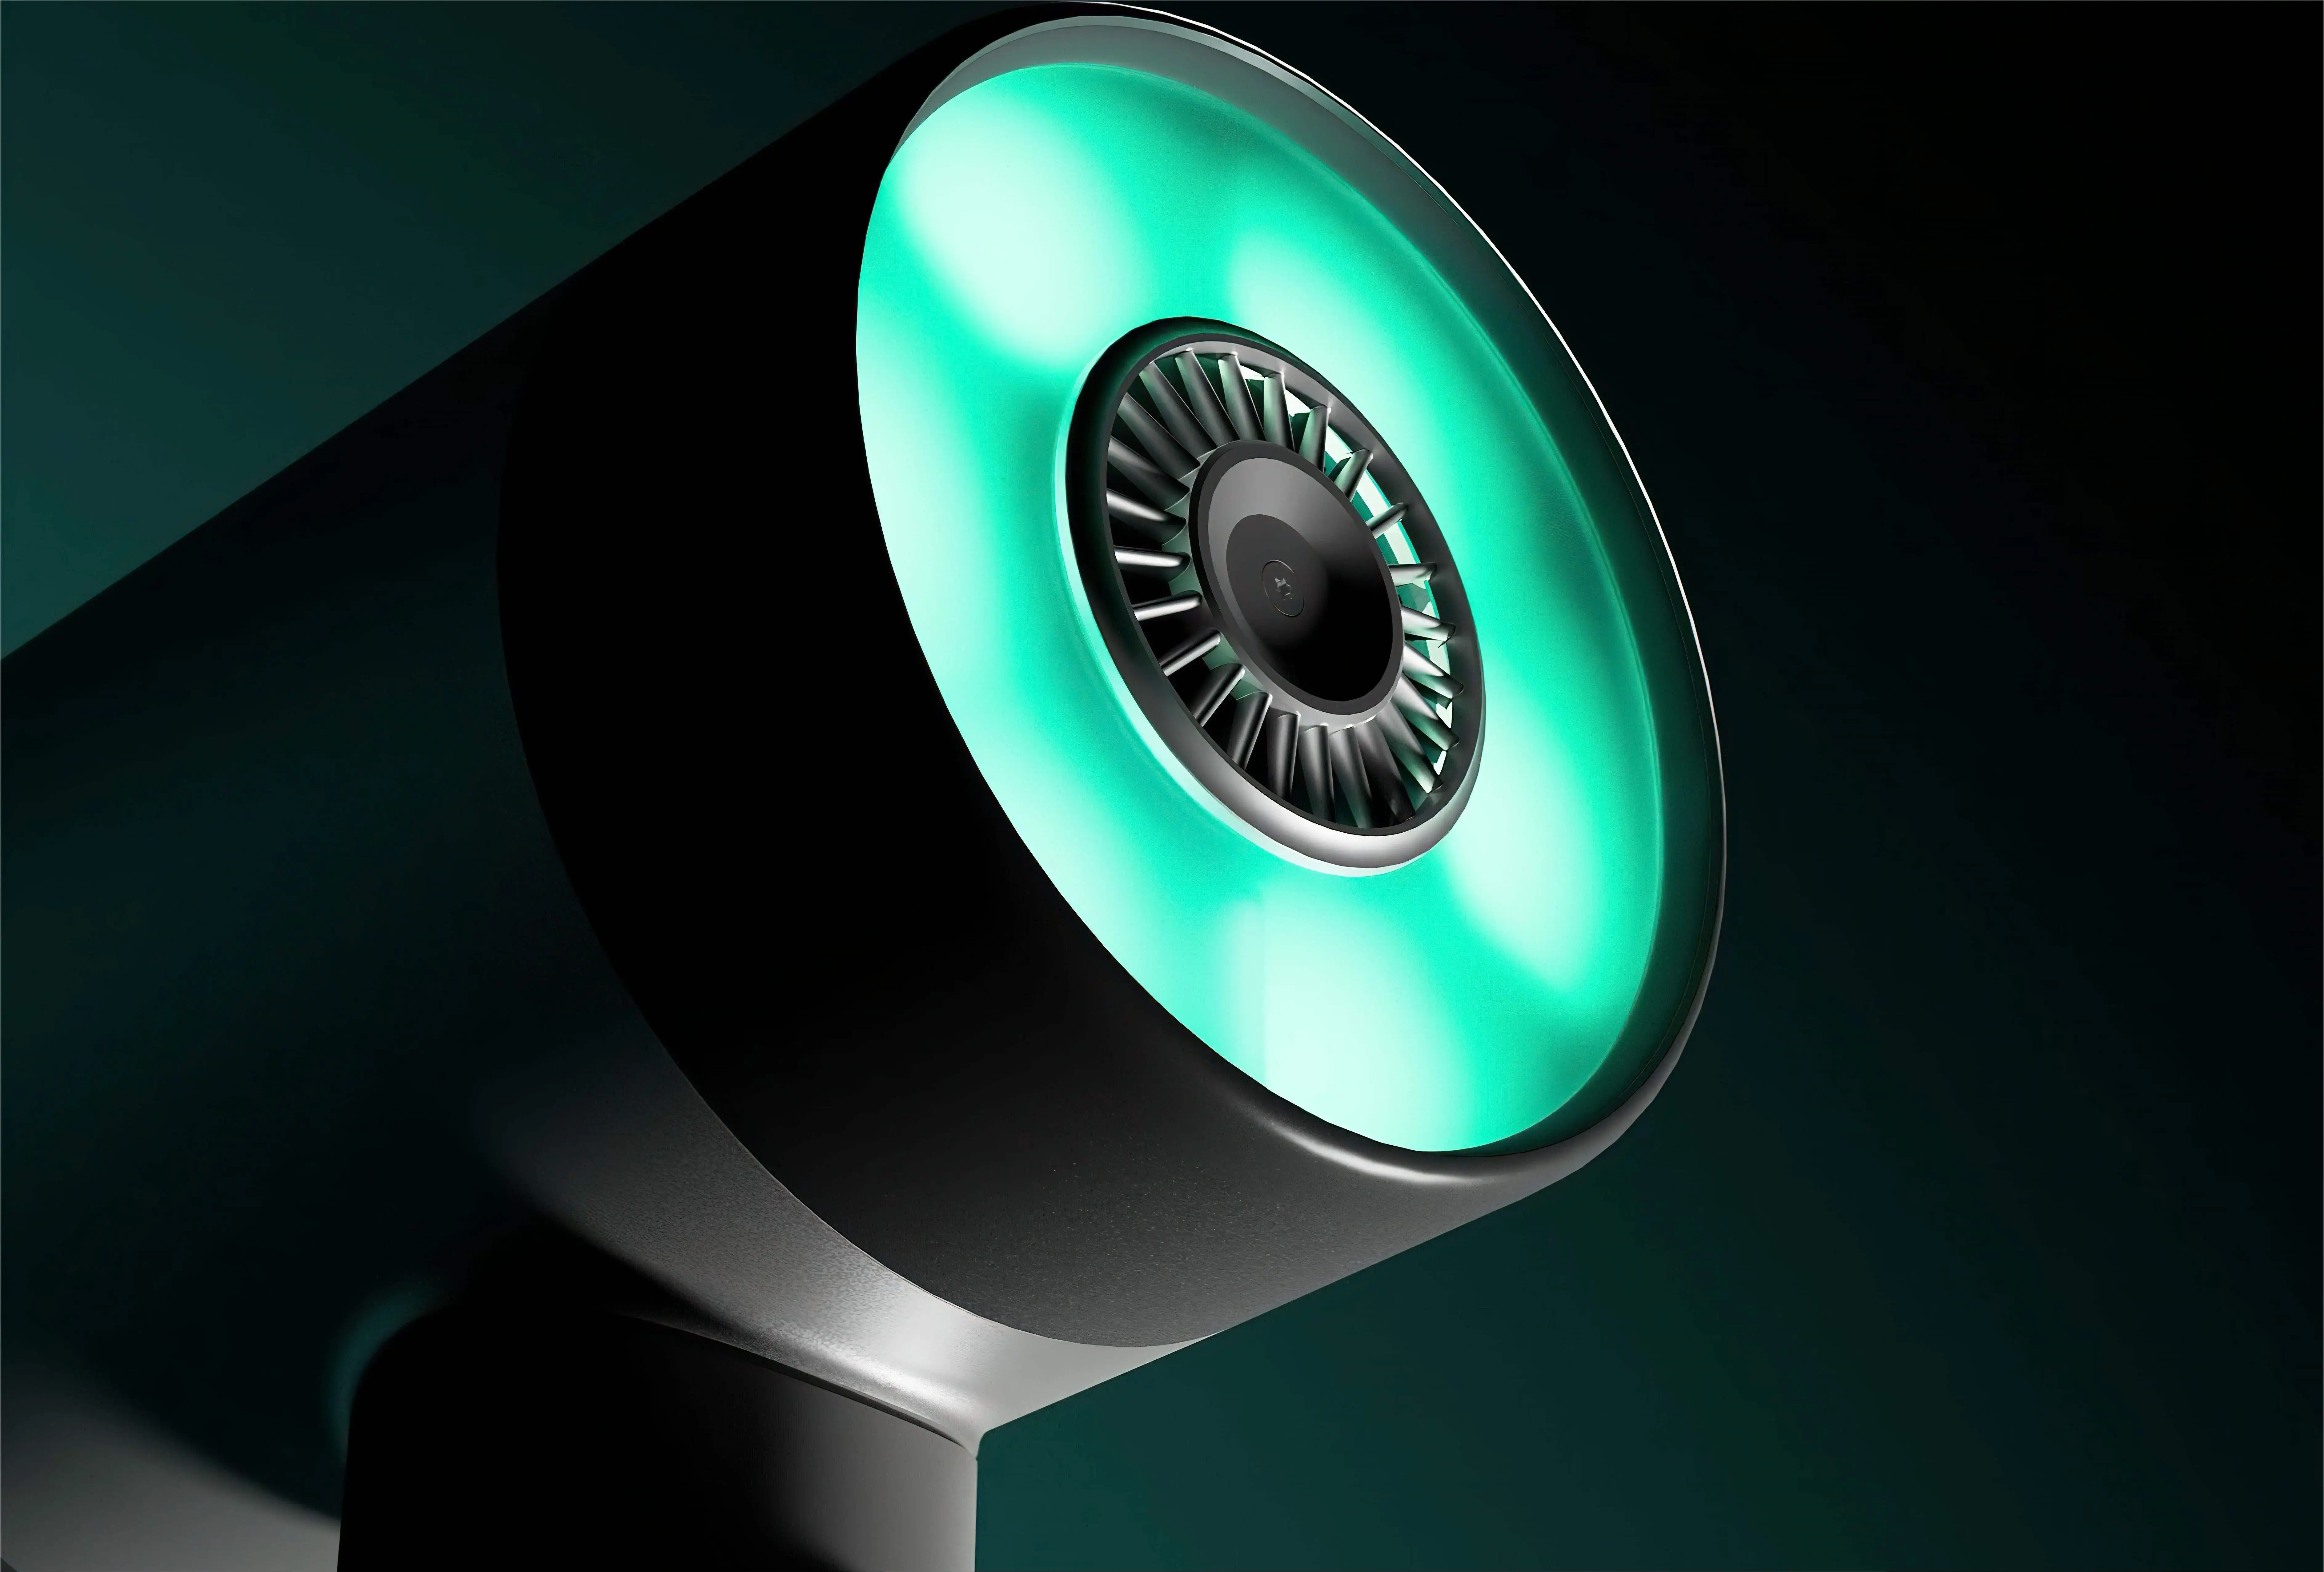 Close-up of hair dryer with innovative green-lit fan.